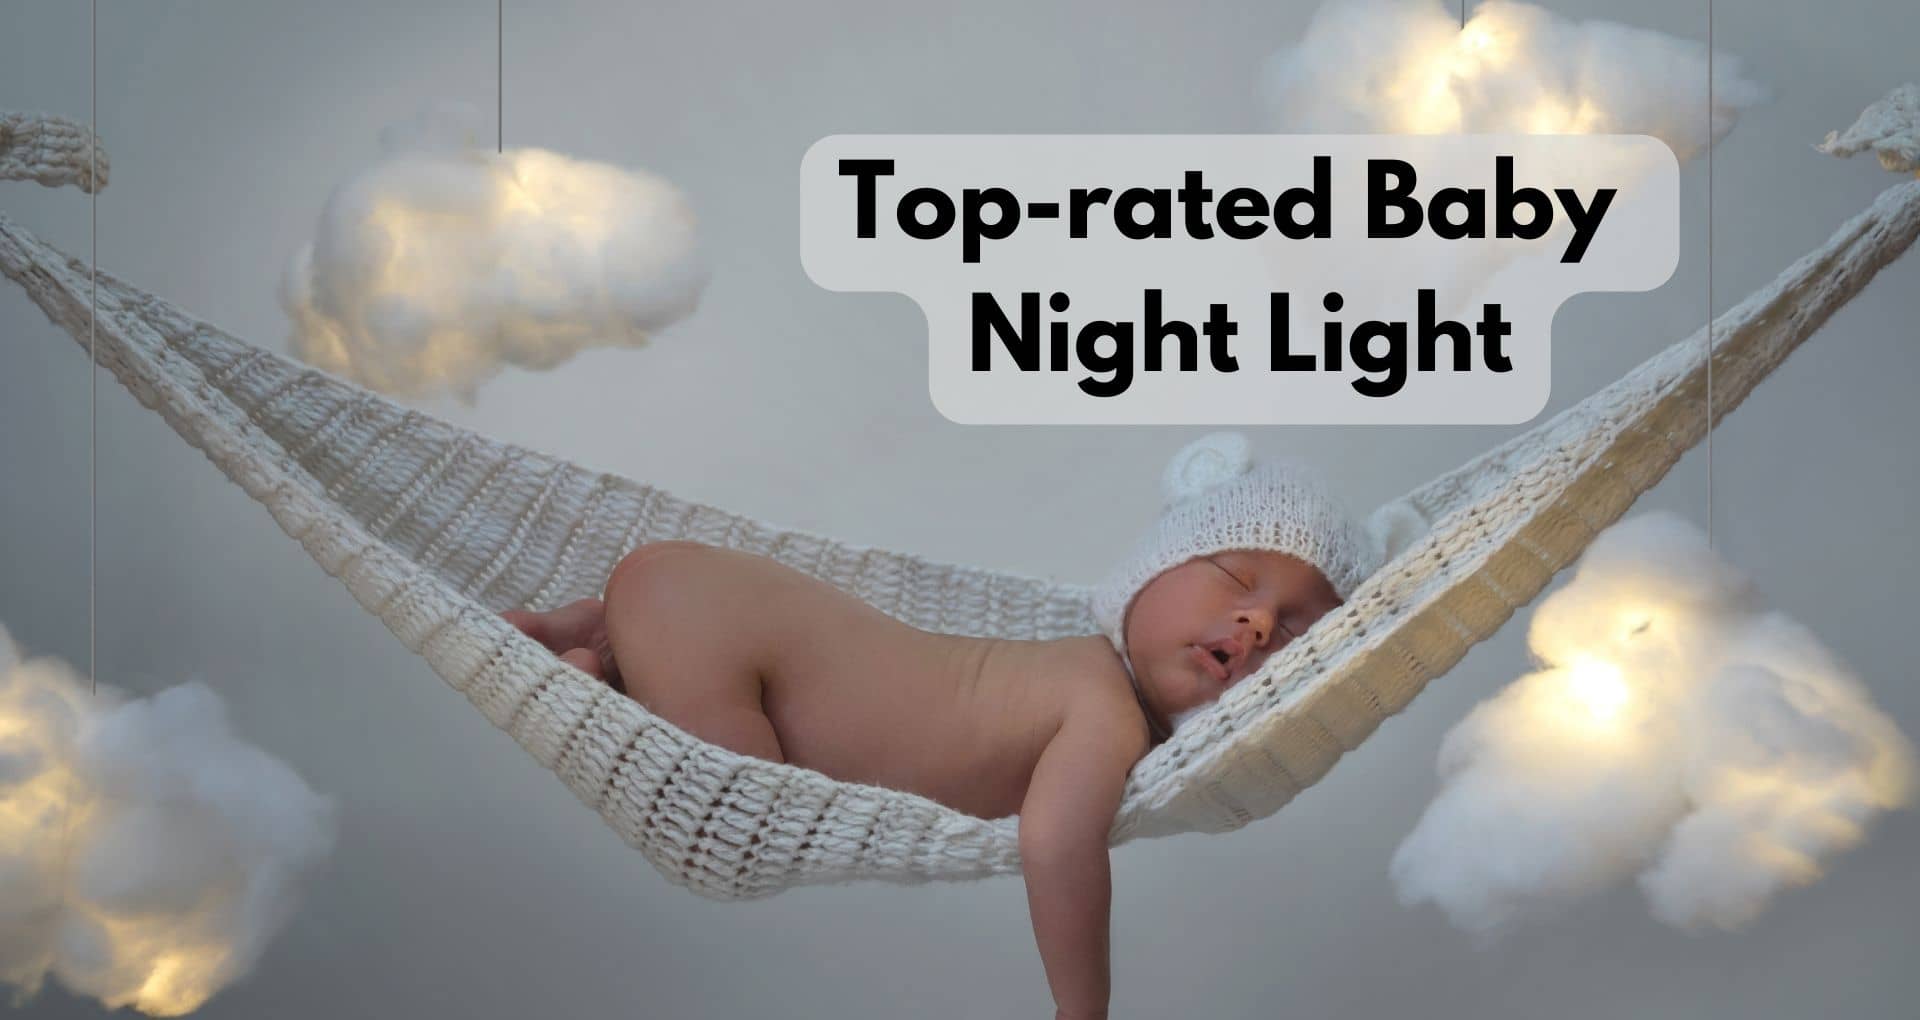 What Are The Top-rated Baby Night Light?